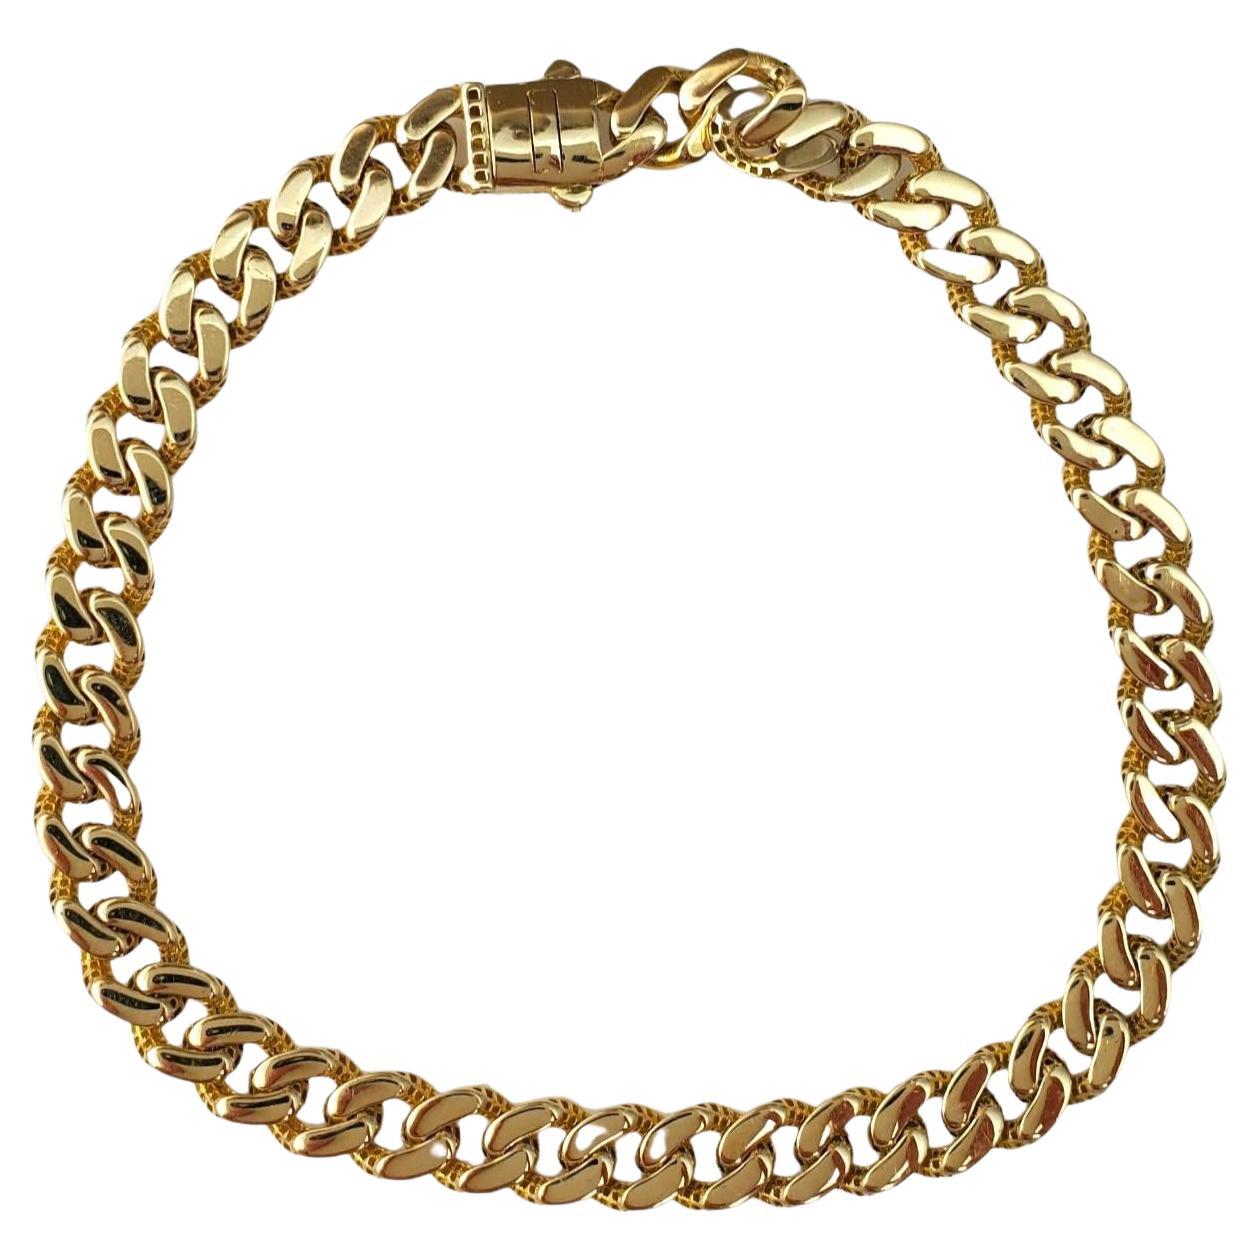 14K Yellow Gold Curb Link Chain Bracelet #17166 For Sale